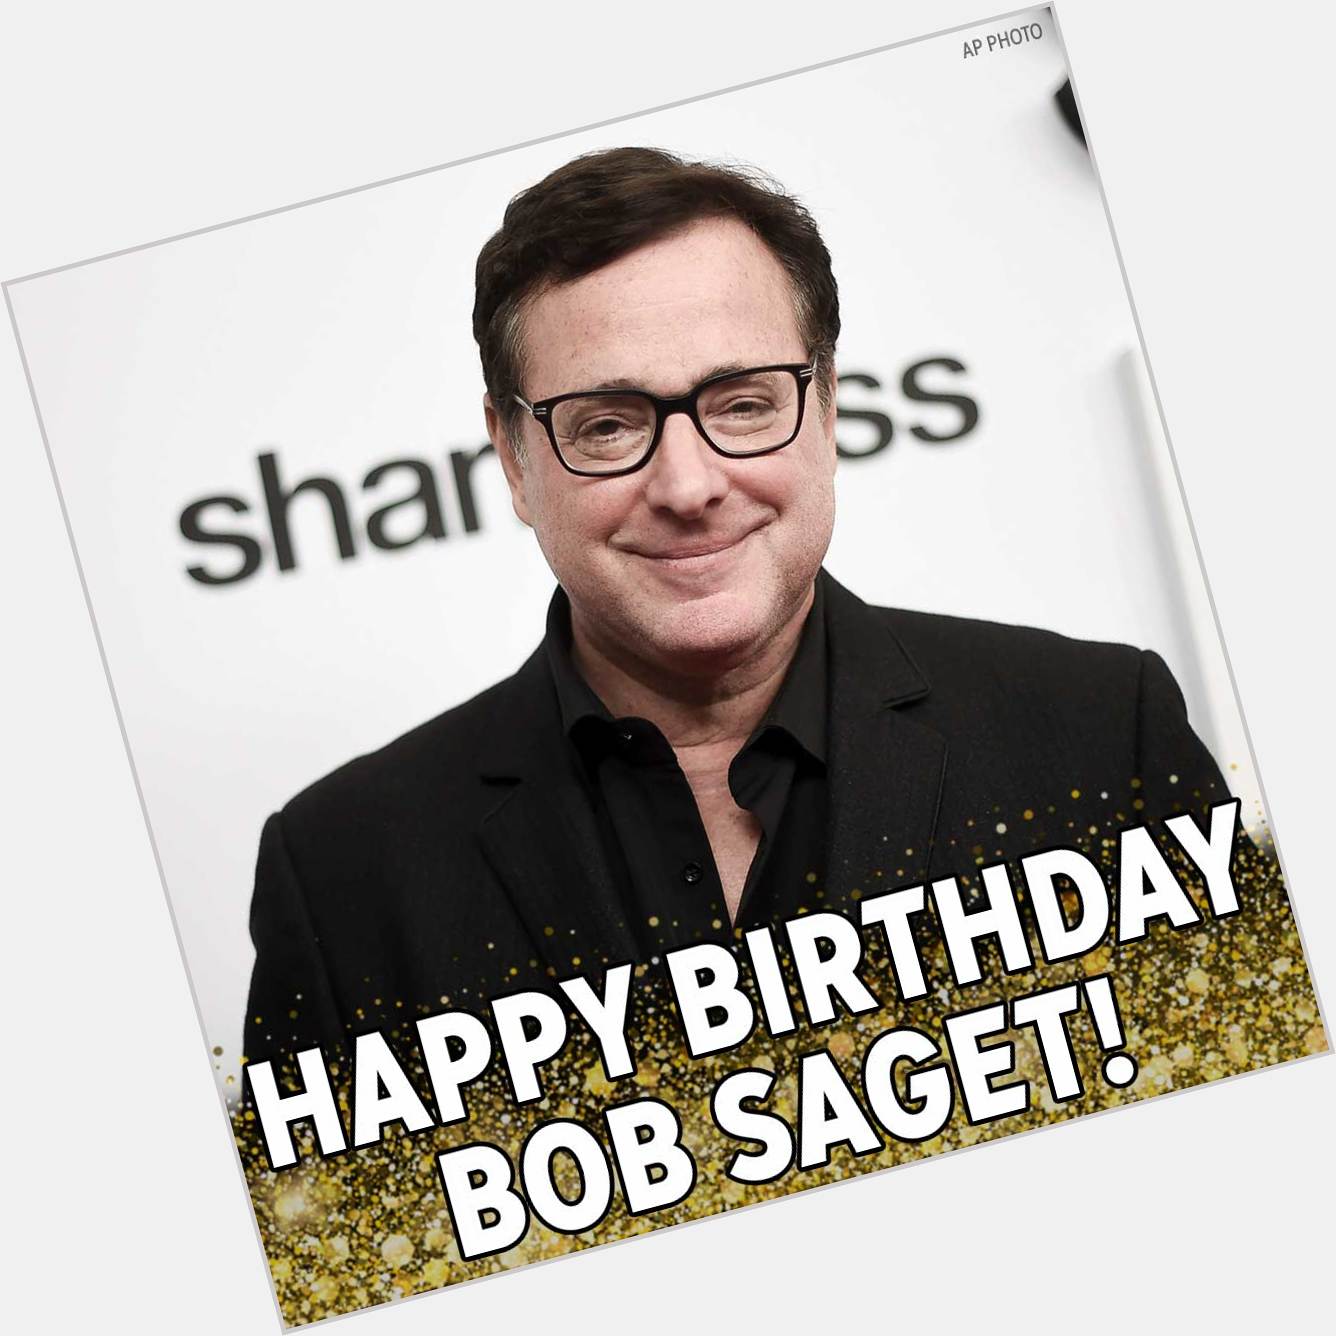 Happy Birthday, Bob Saget! We hope the Full House star has a great day. 